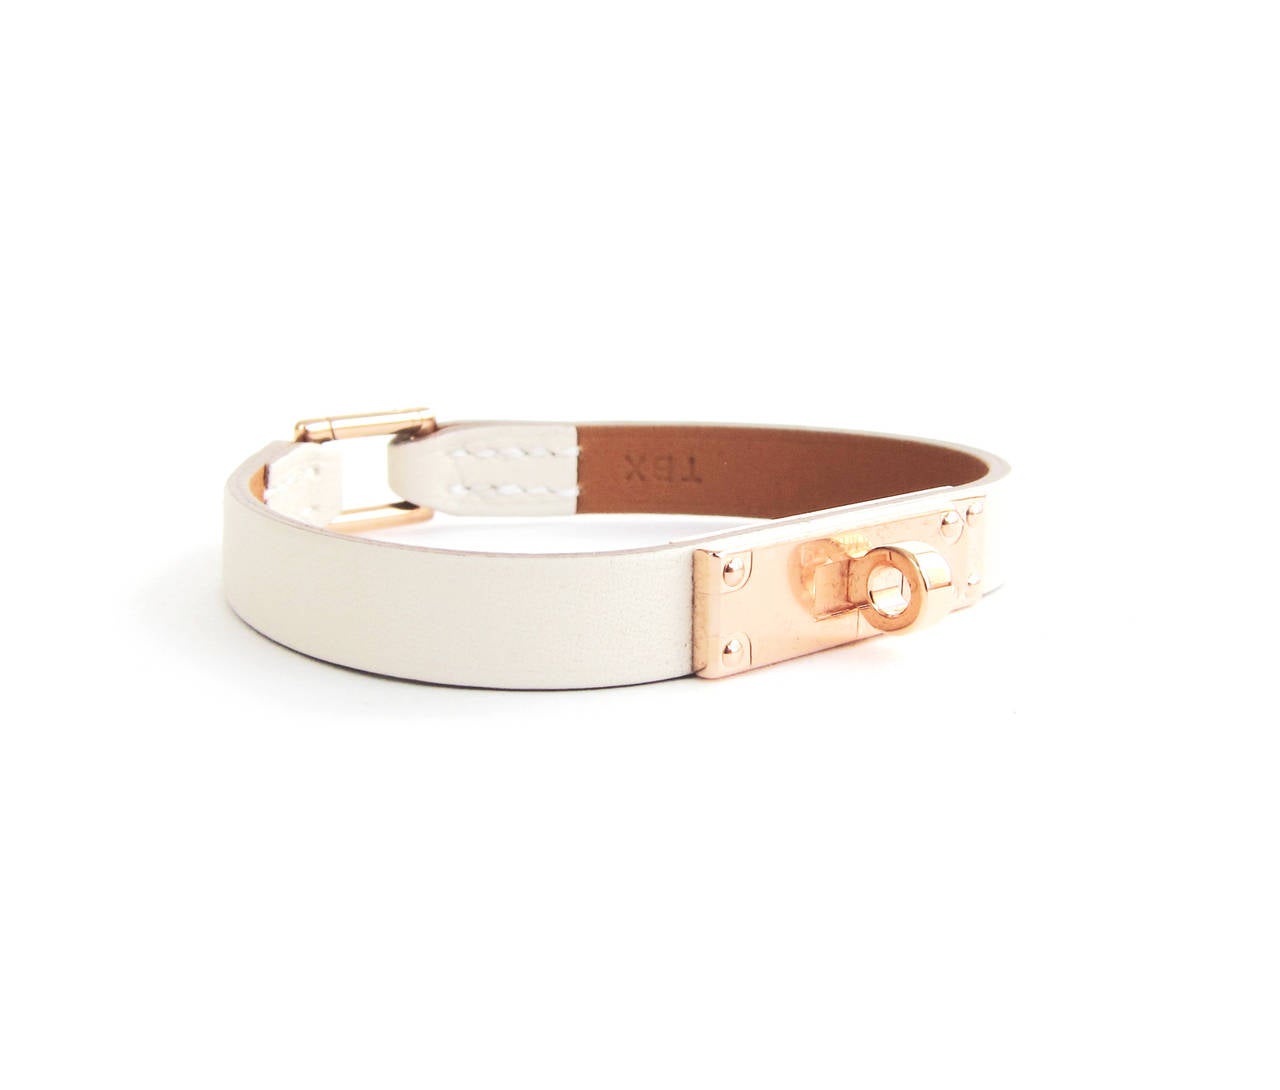 Hermes Craie Swift Rose Gold Micro Kelly Leather Bracelet Medium

Brand New in Box Coming with Hermes velvet pouch, box and ribbon 
SOLD OUT! Latest IMPOSSIBLE TO FIND *ROSE Gold* series release
Craie (chalk) leather with Rose Gold is a divine